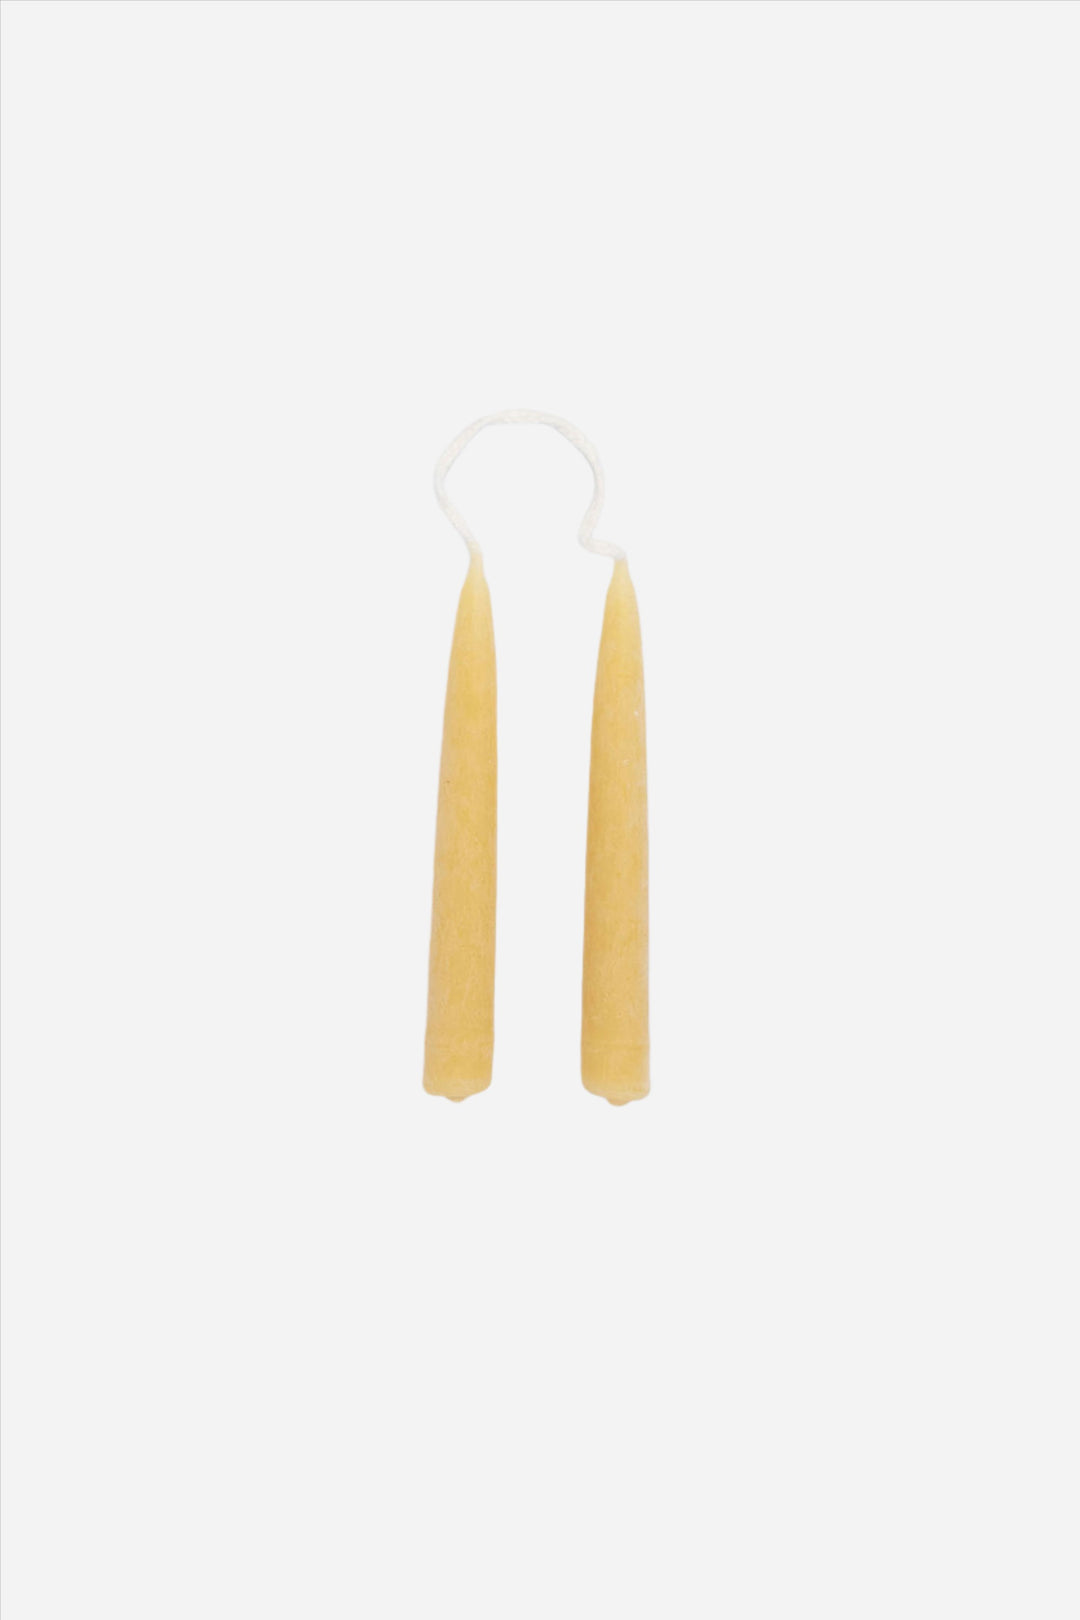 Beeswax Pair of Tree Candles - Domestic Science Home